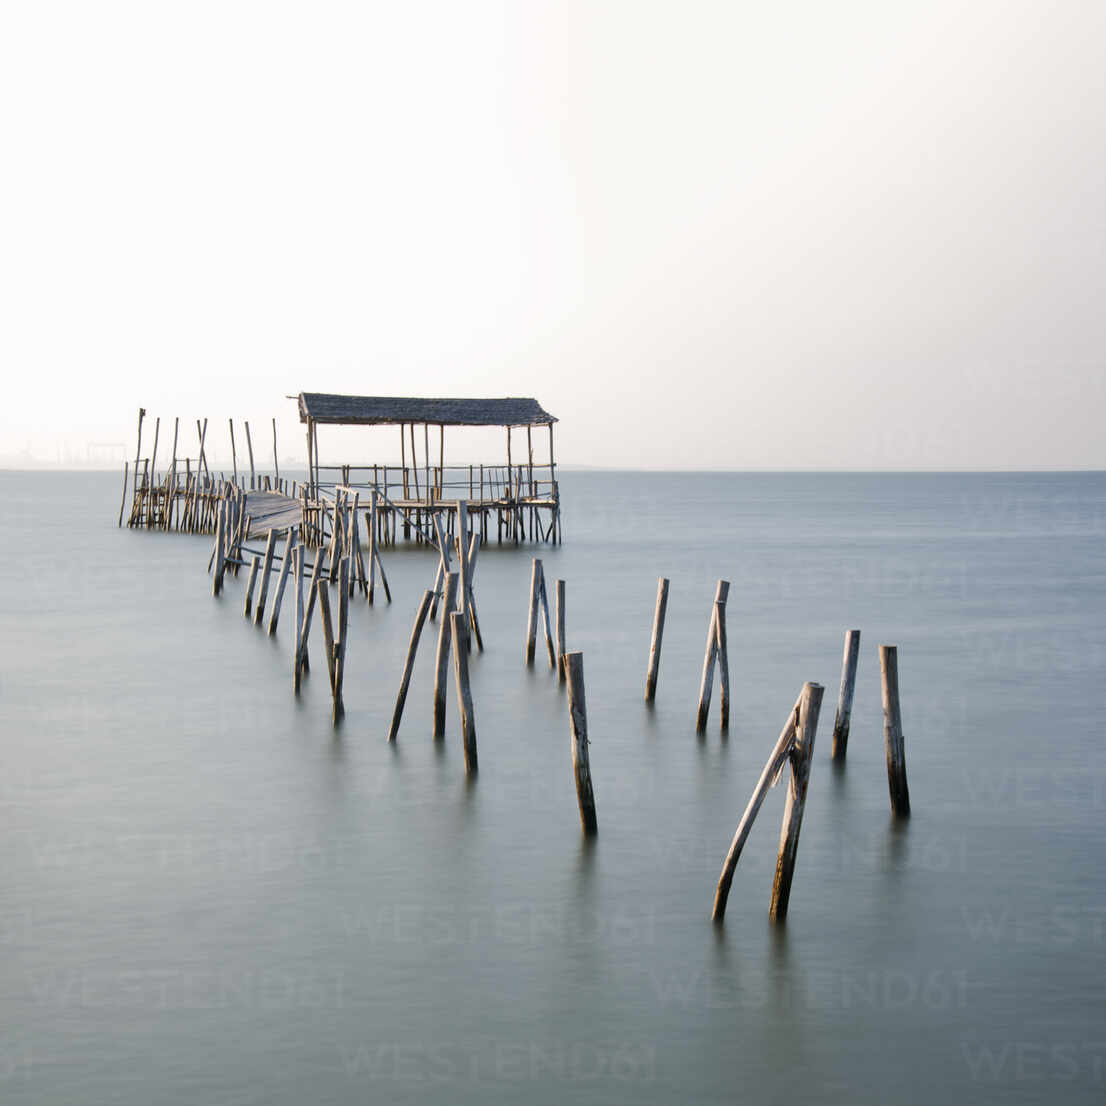 Abandoned partially destroyed dock made of thick wooden sticks on endless  ocean with pure water under serene sky in daylight stock photo